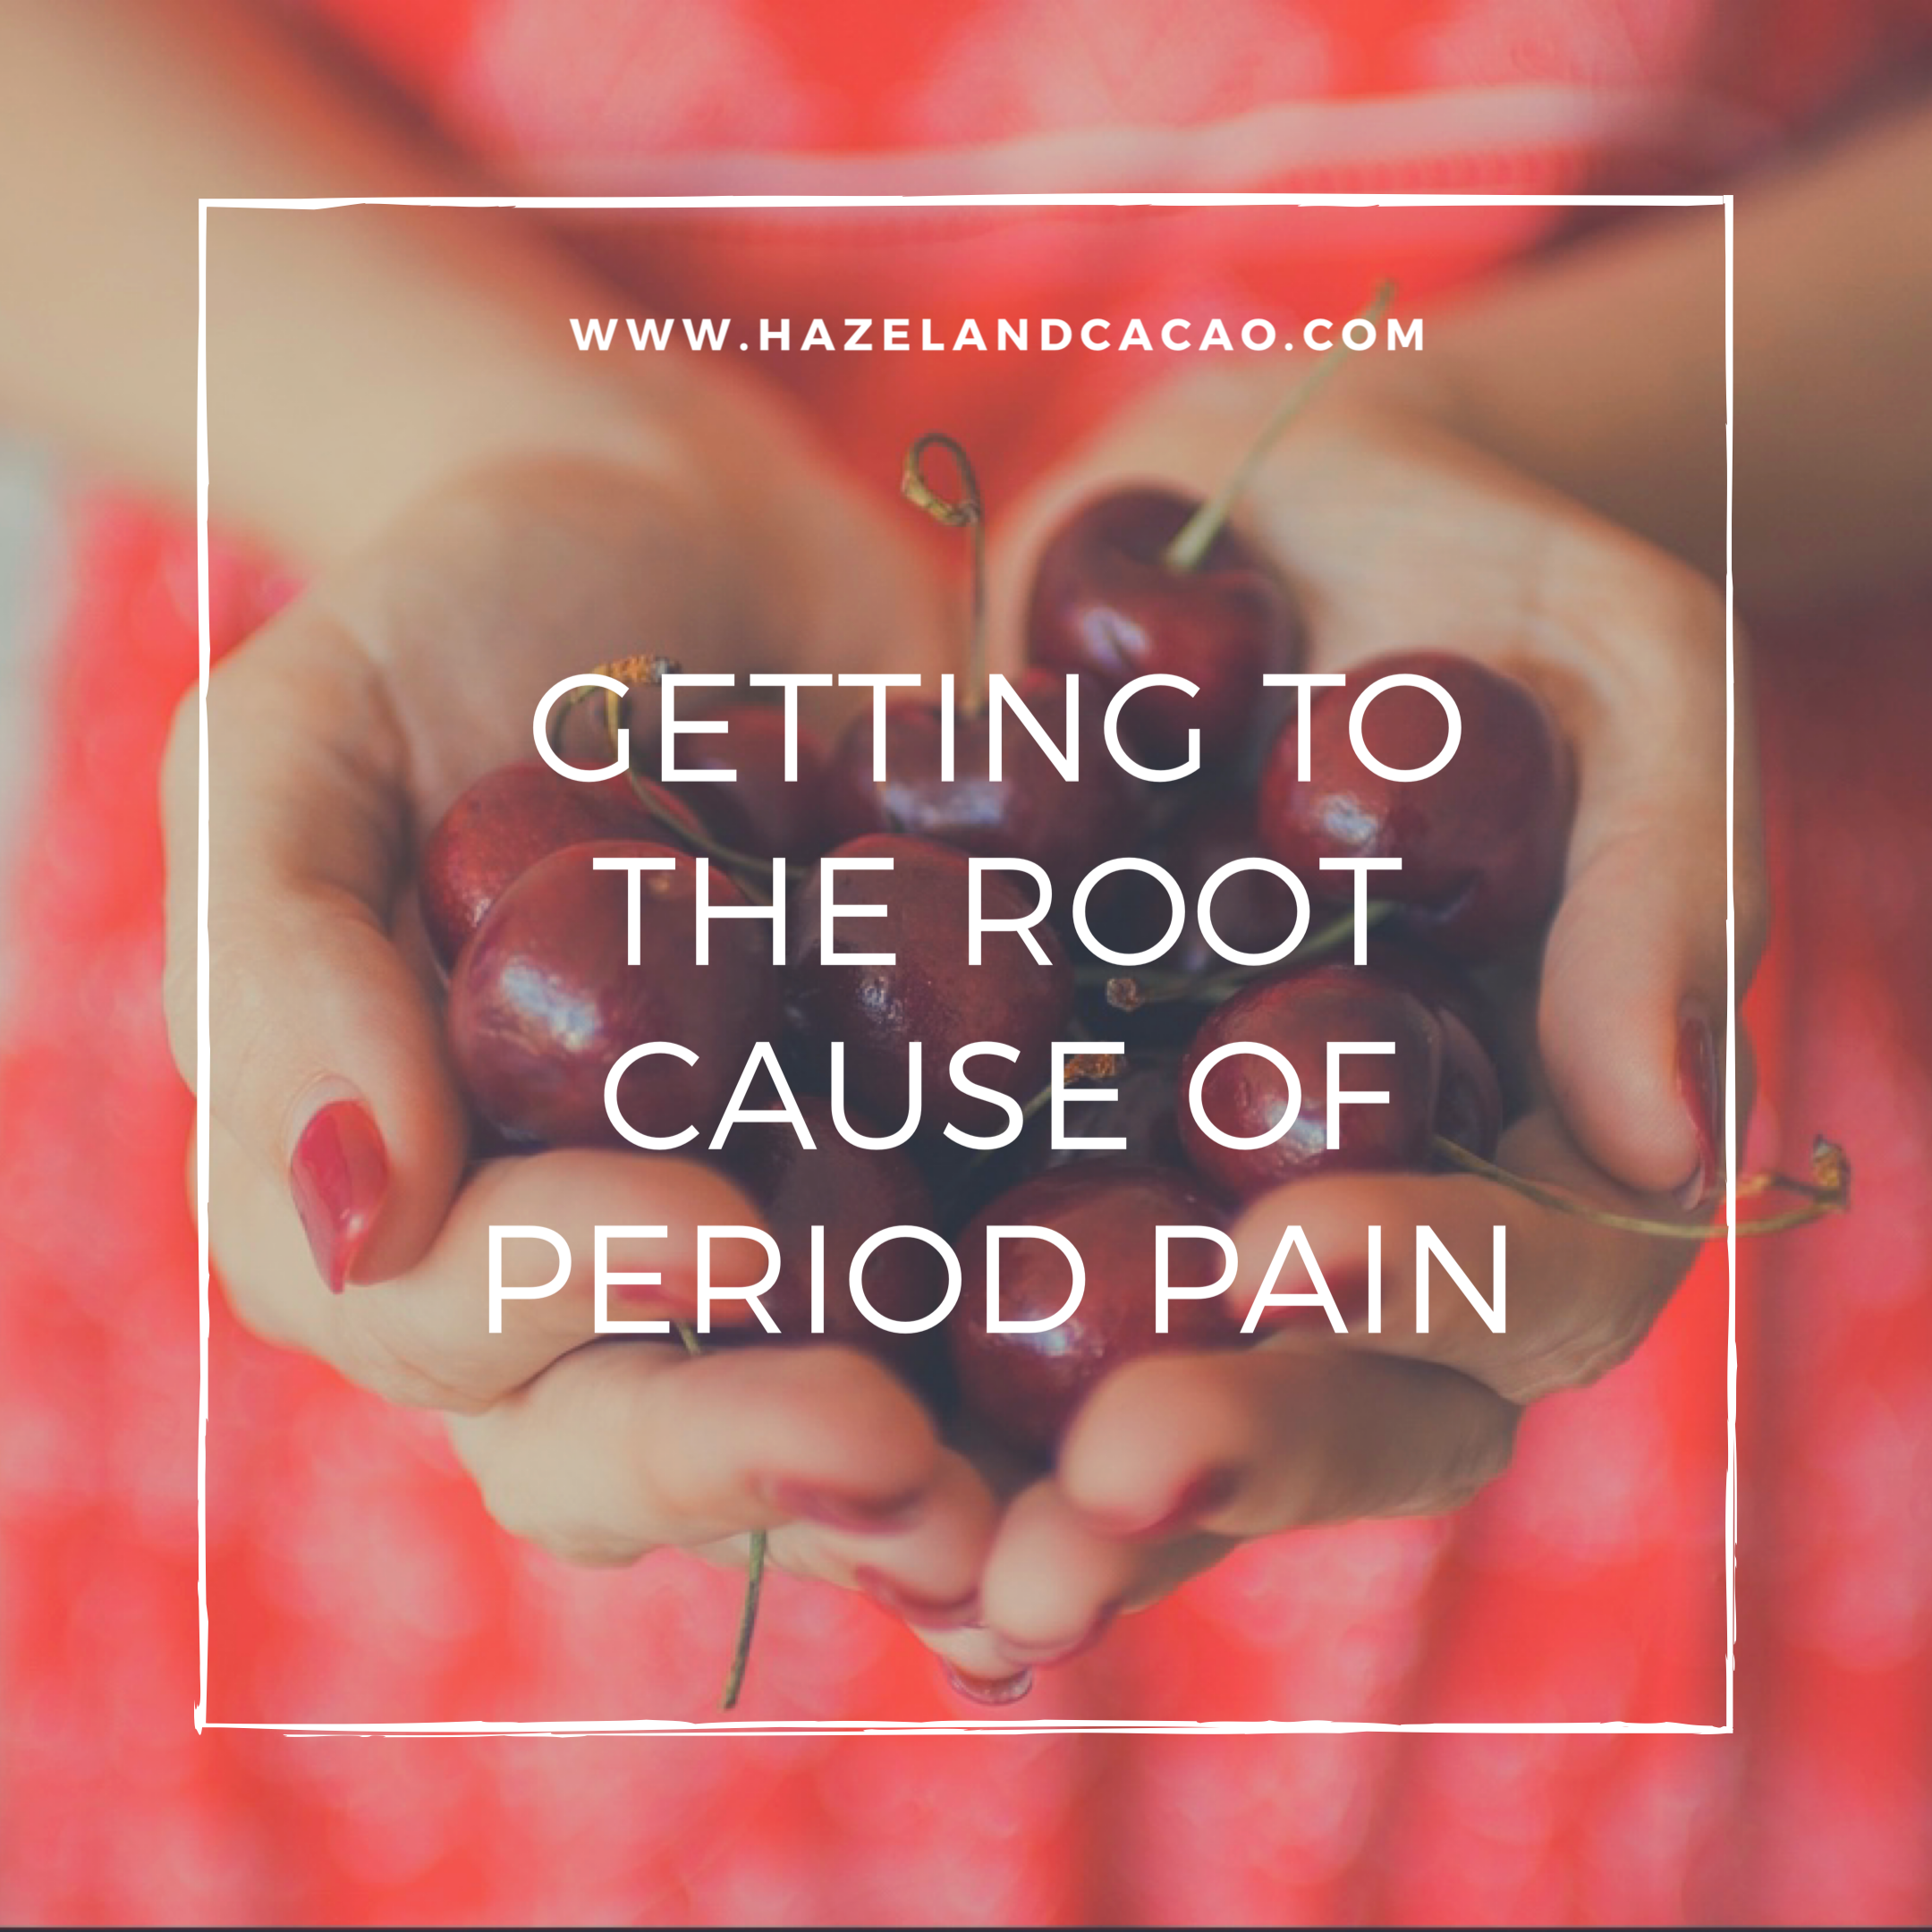 Getting to the Root Cause of Period Pain